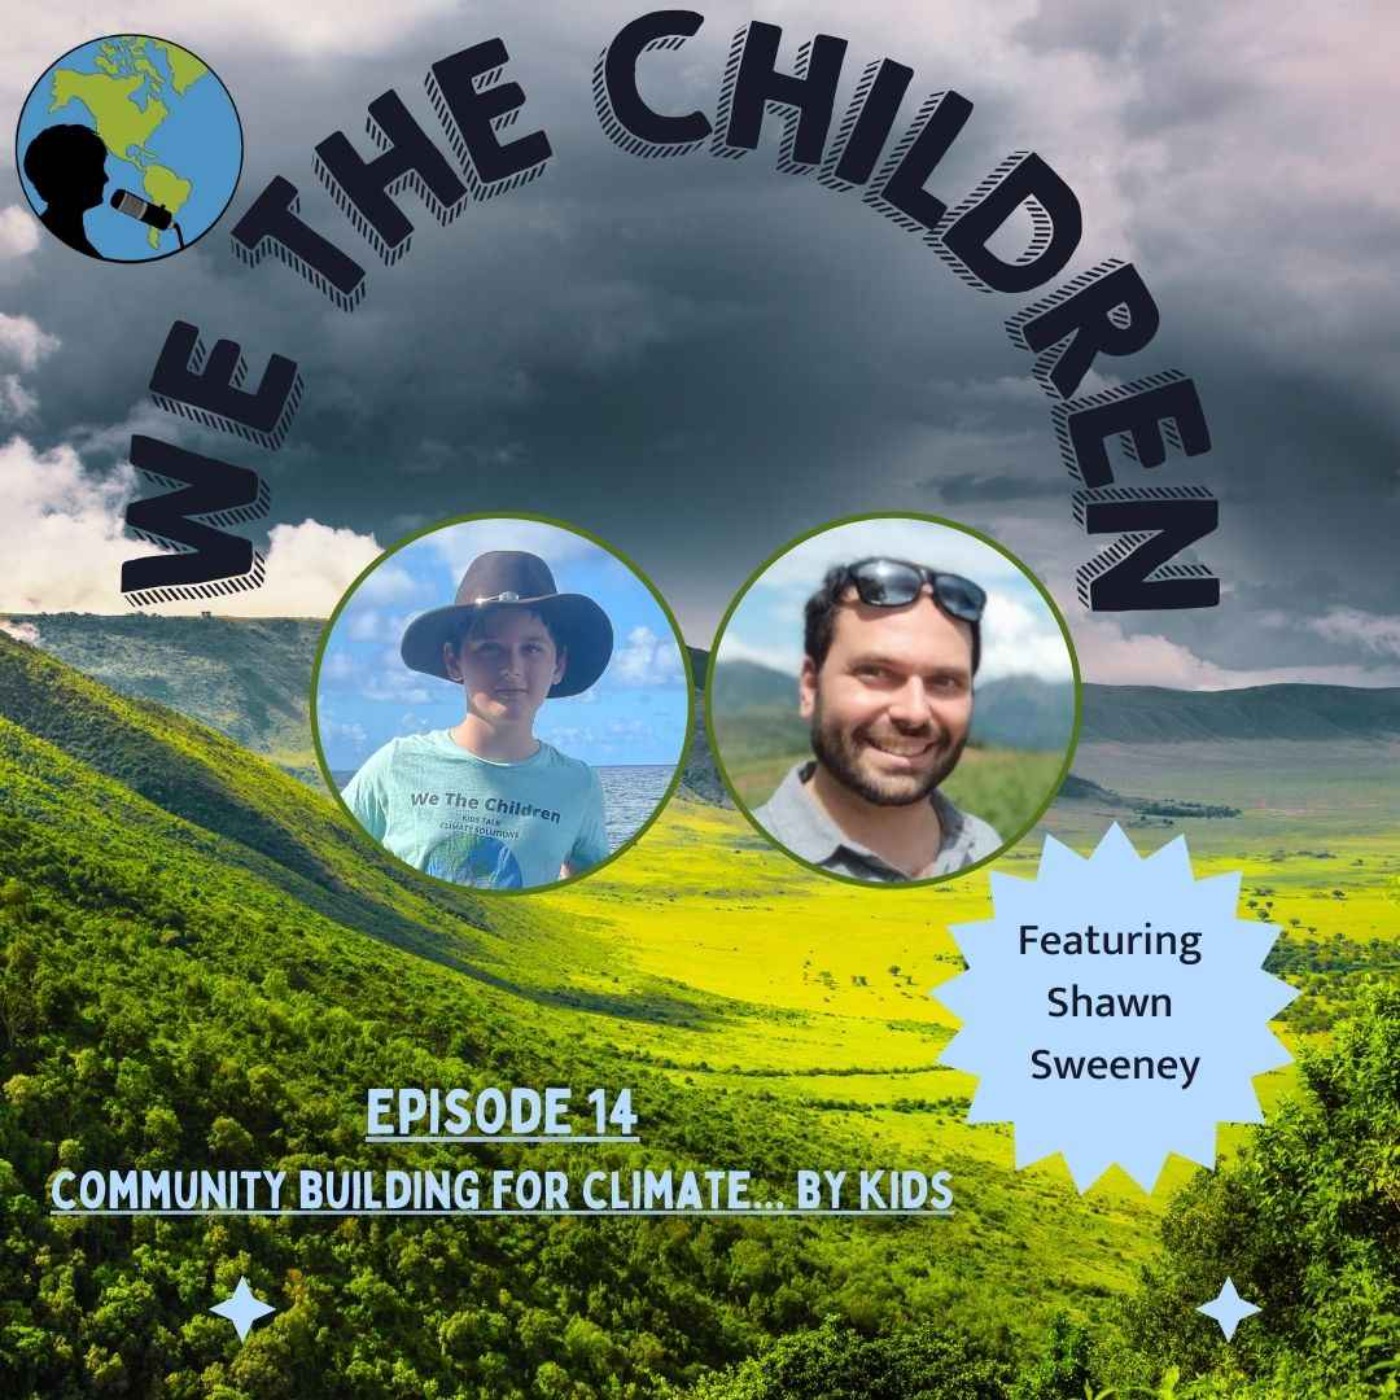 We The Children - Community Building for Climate...by Kids